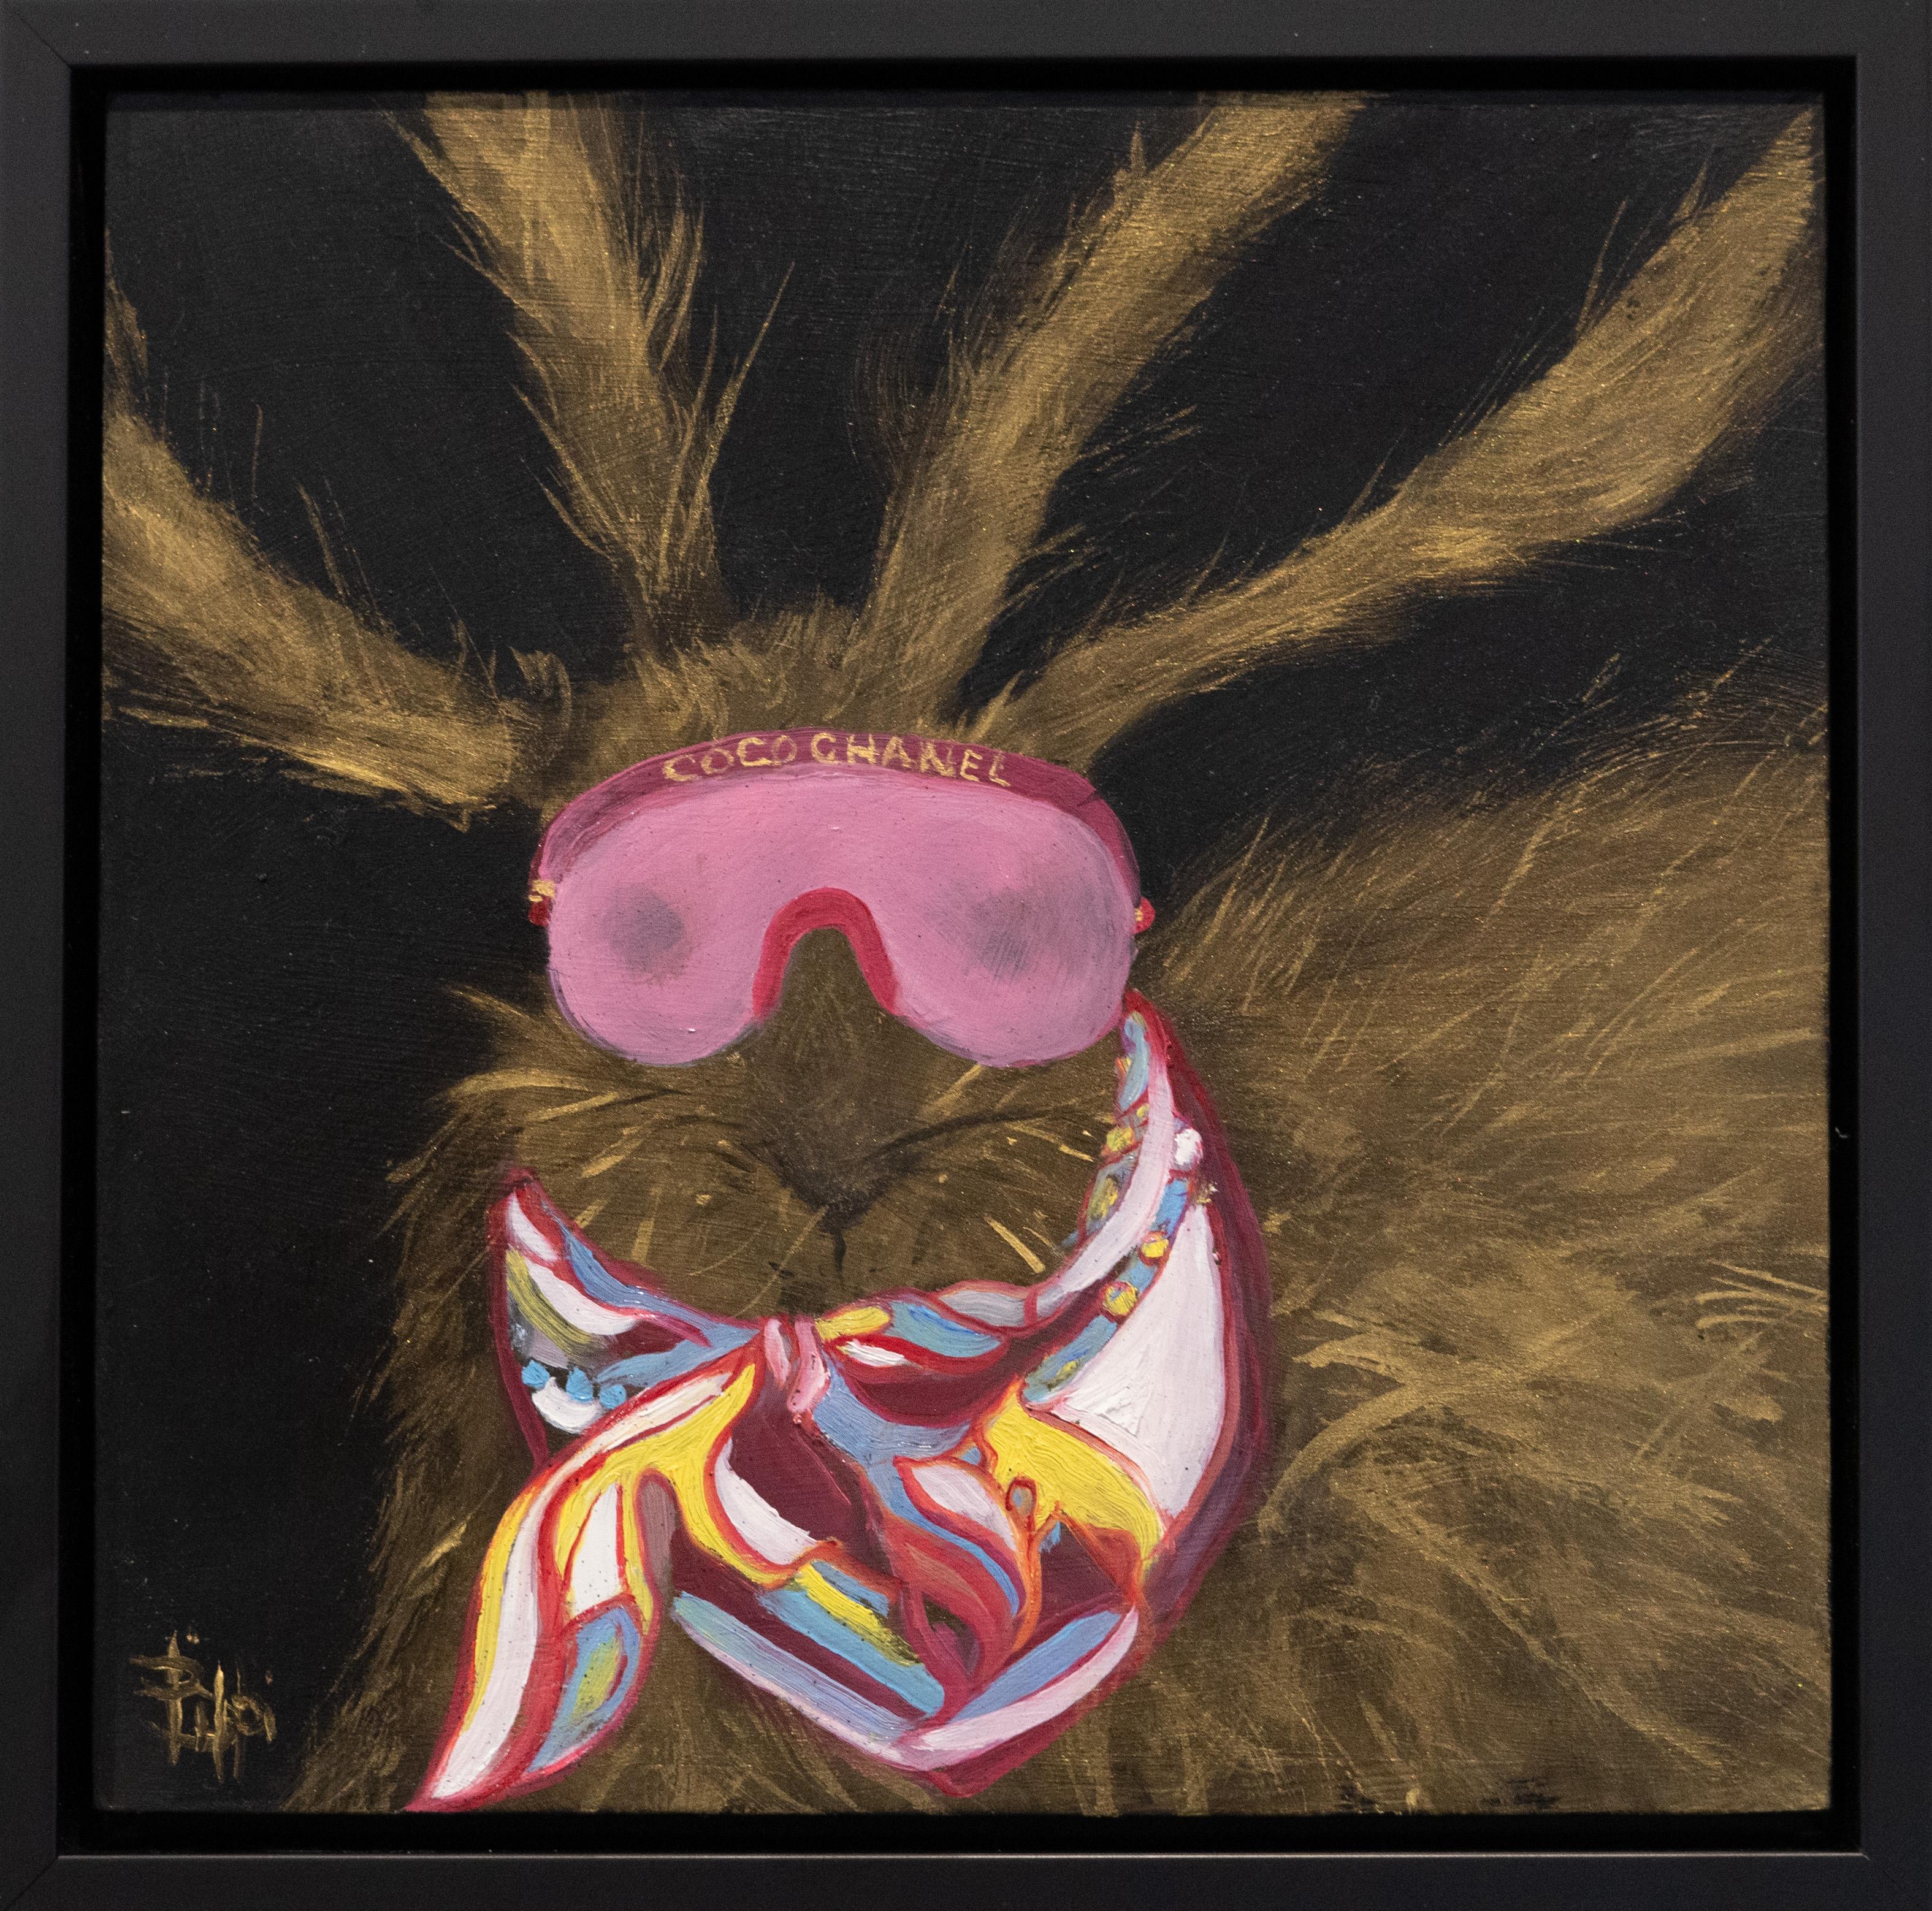 Bibbi Anderson Animal Painting - Golden Hare with Coco Chanel Sunglasses  10x10  Contemporary Art  Framed 